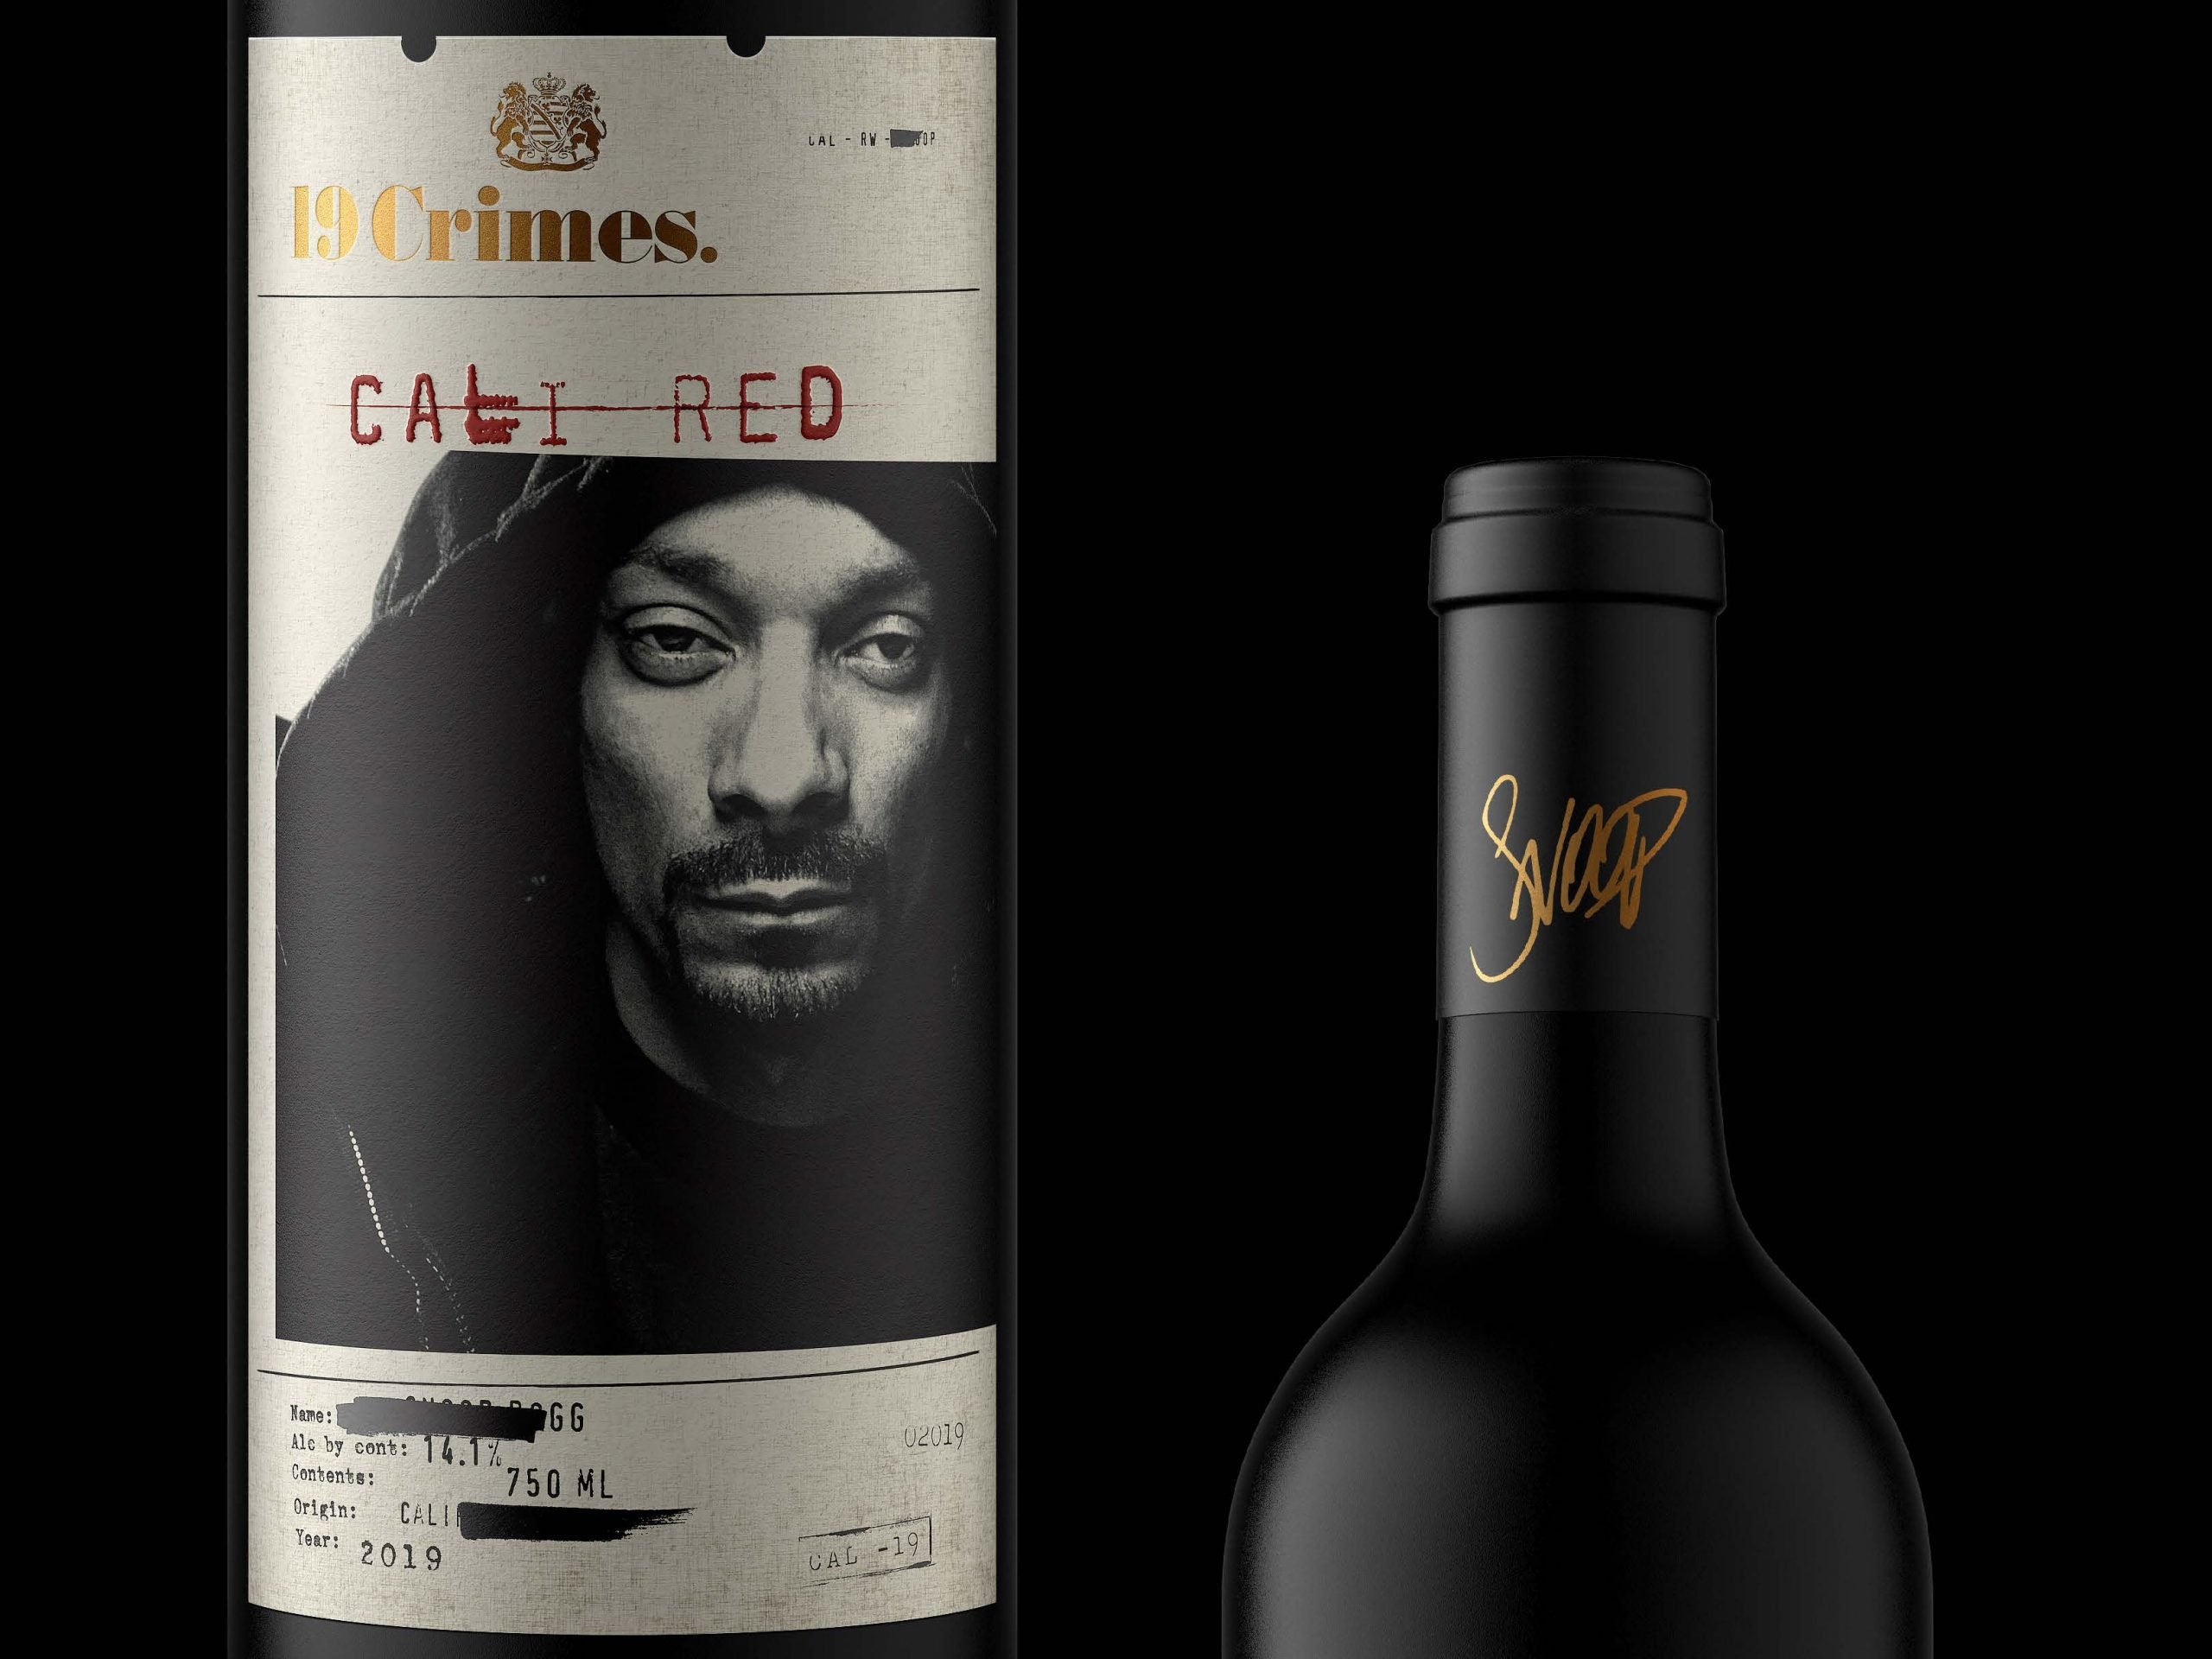 Snoop Dogg Is The Inspiration For New 19 Crimes Wine